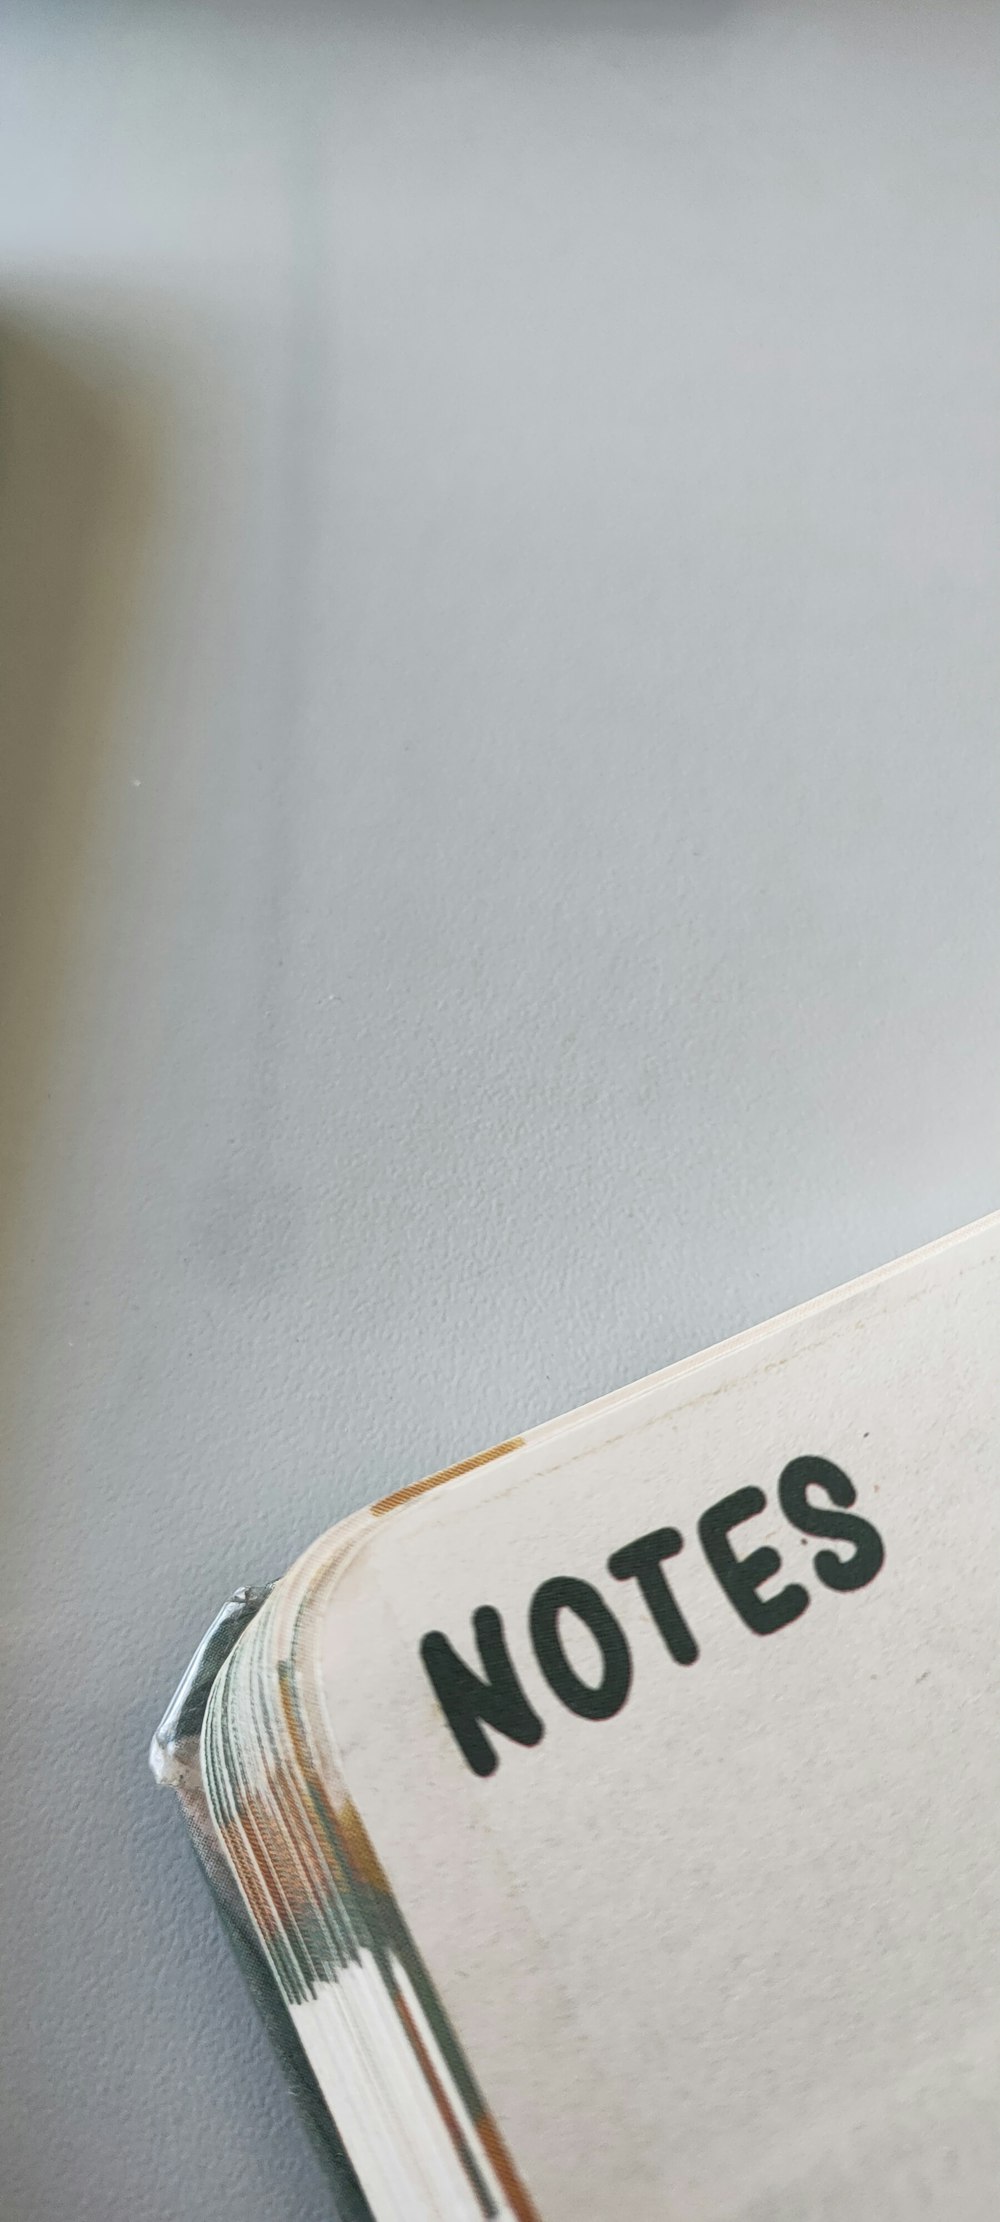 a close up of a note book on a table